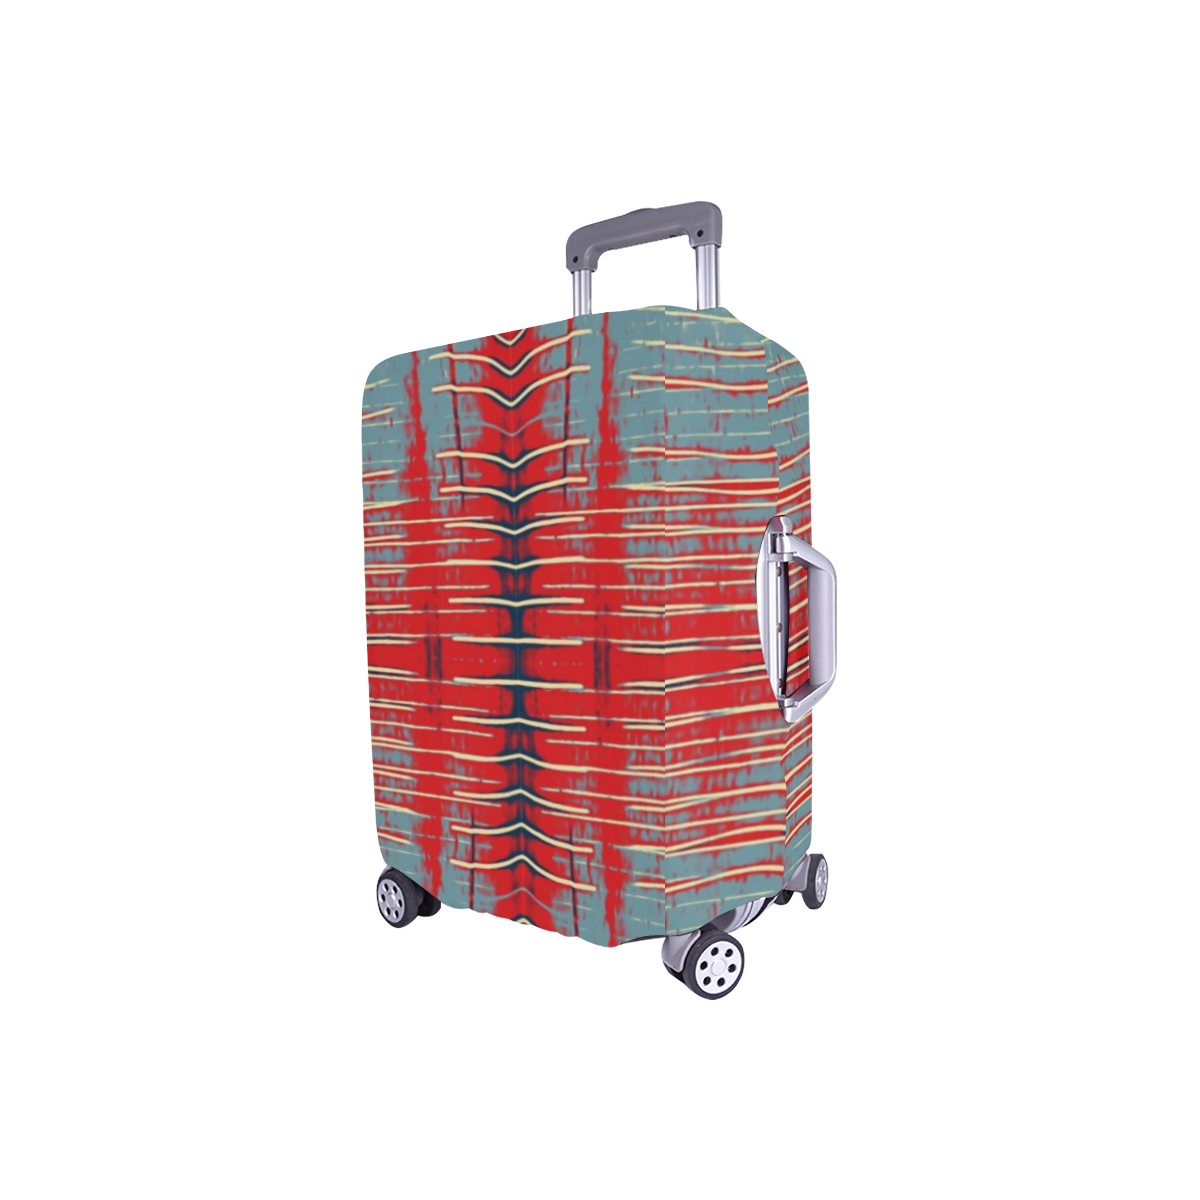 atmospheric floating 2 Luggage Cover/Small 18"-21"